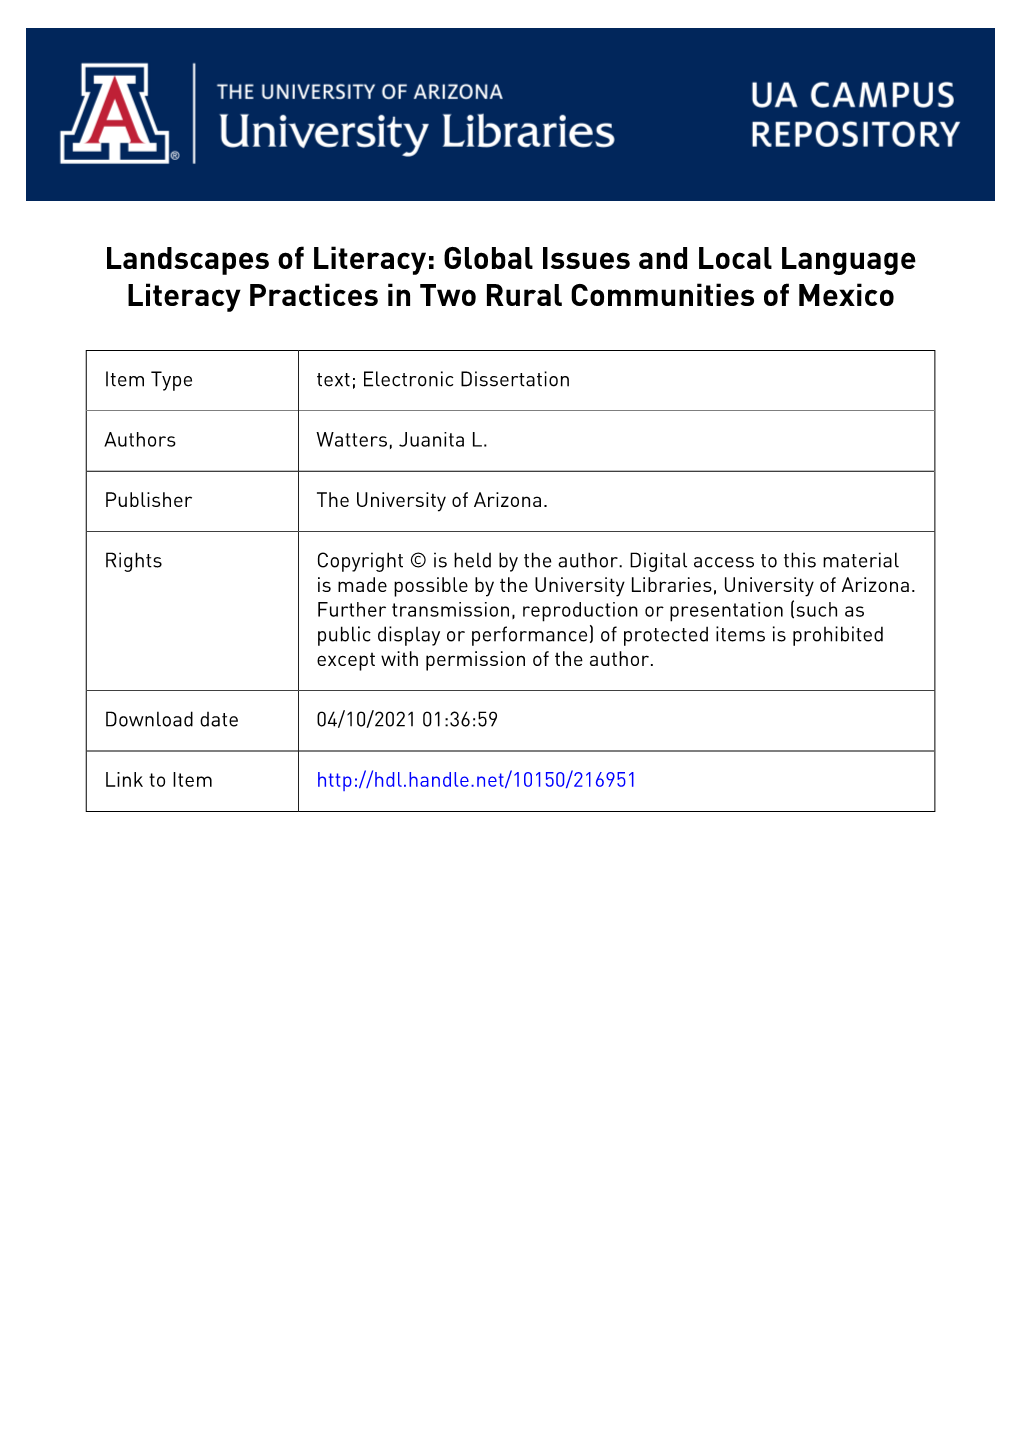 Global Issues and Local Language Literacy Practices in Two Rural Communities of Mexico